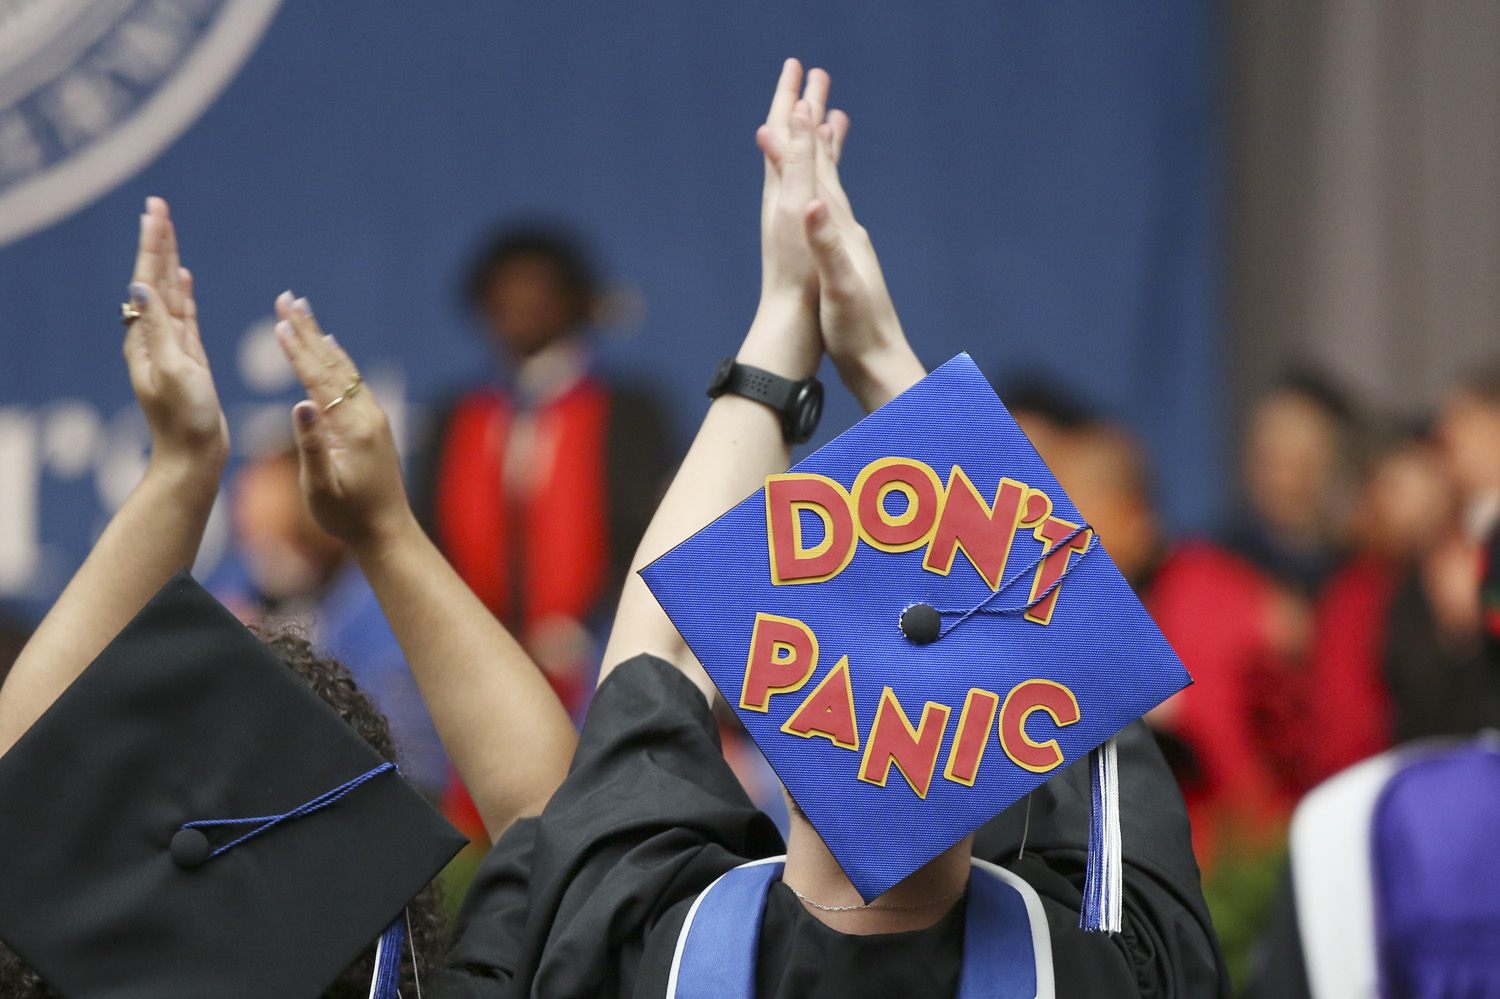 A mortarboard decorated with red letters that read "Don't Panic"